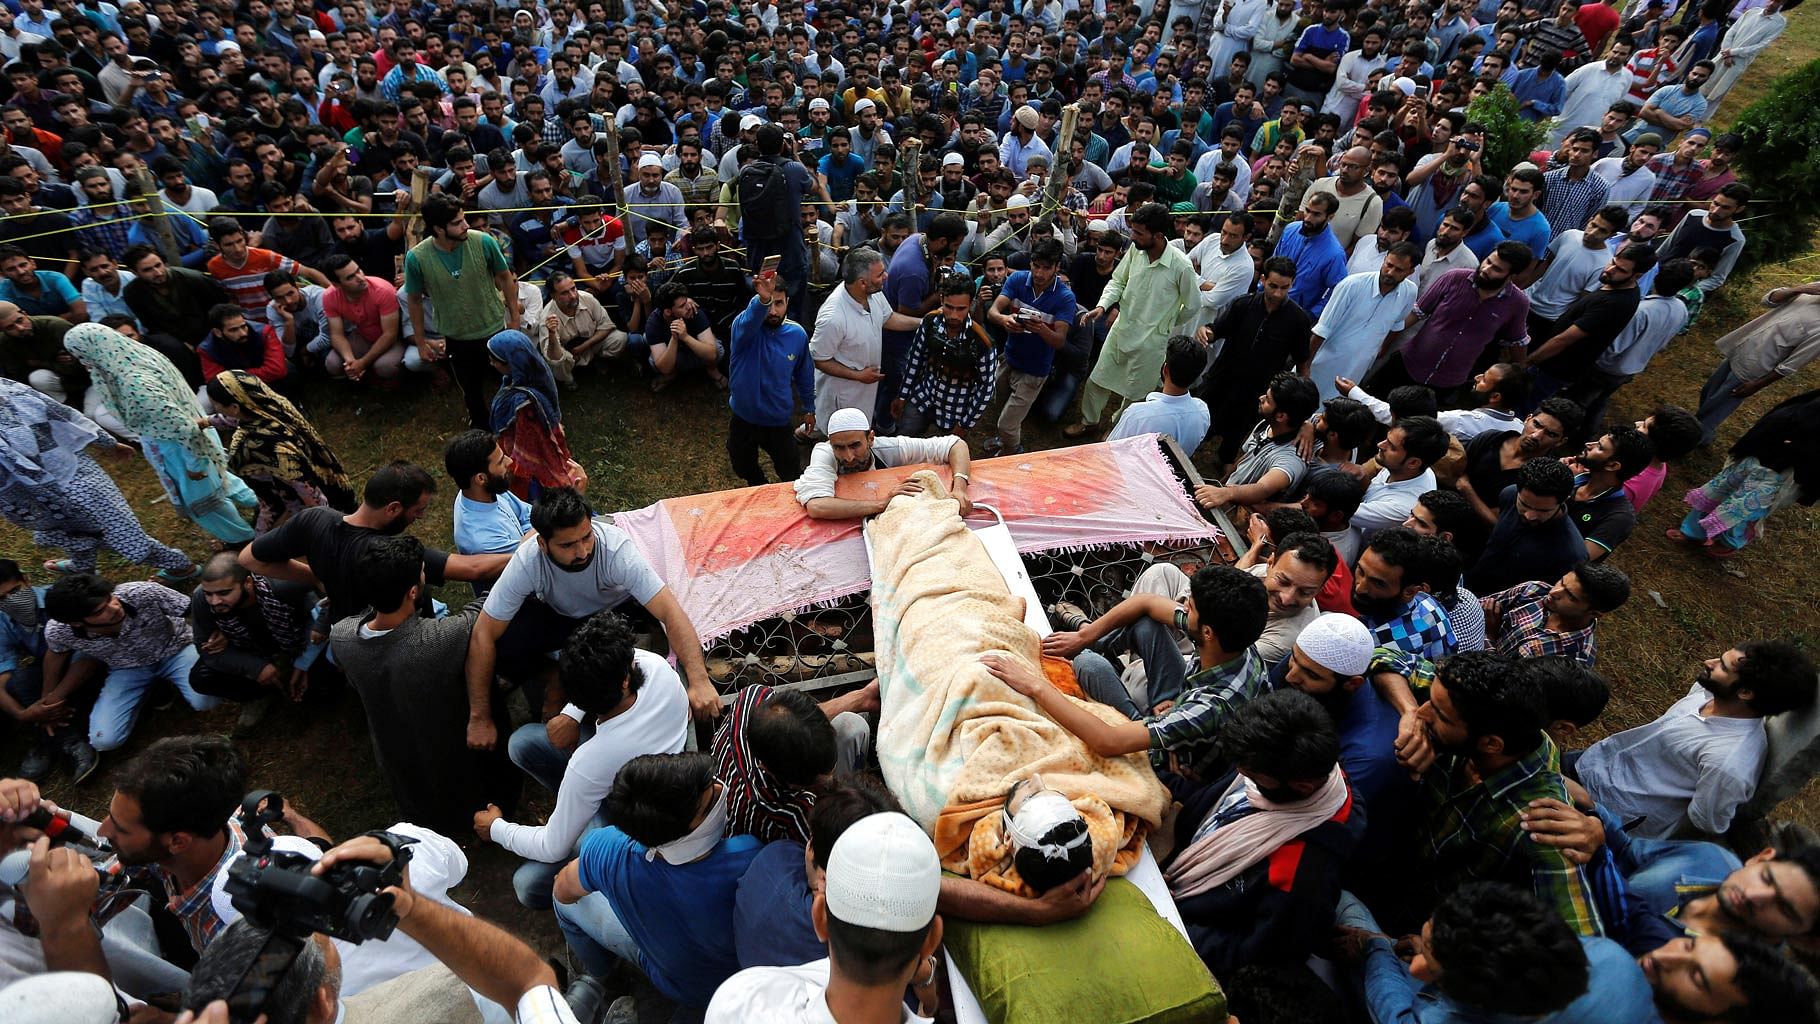 File photo of people in Kashmir attending Burhan Wani’s funeral after defying curfew. (Photo: Reuters)